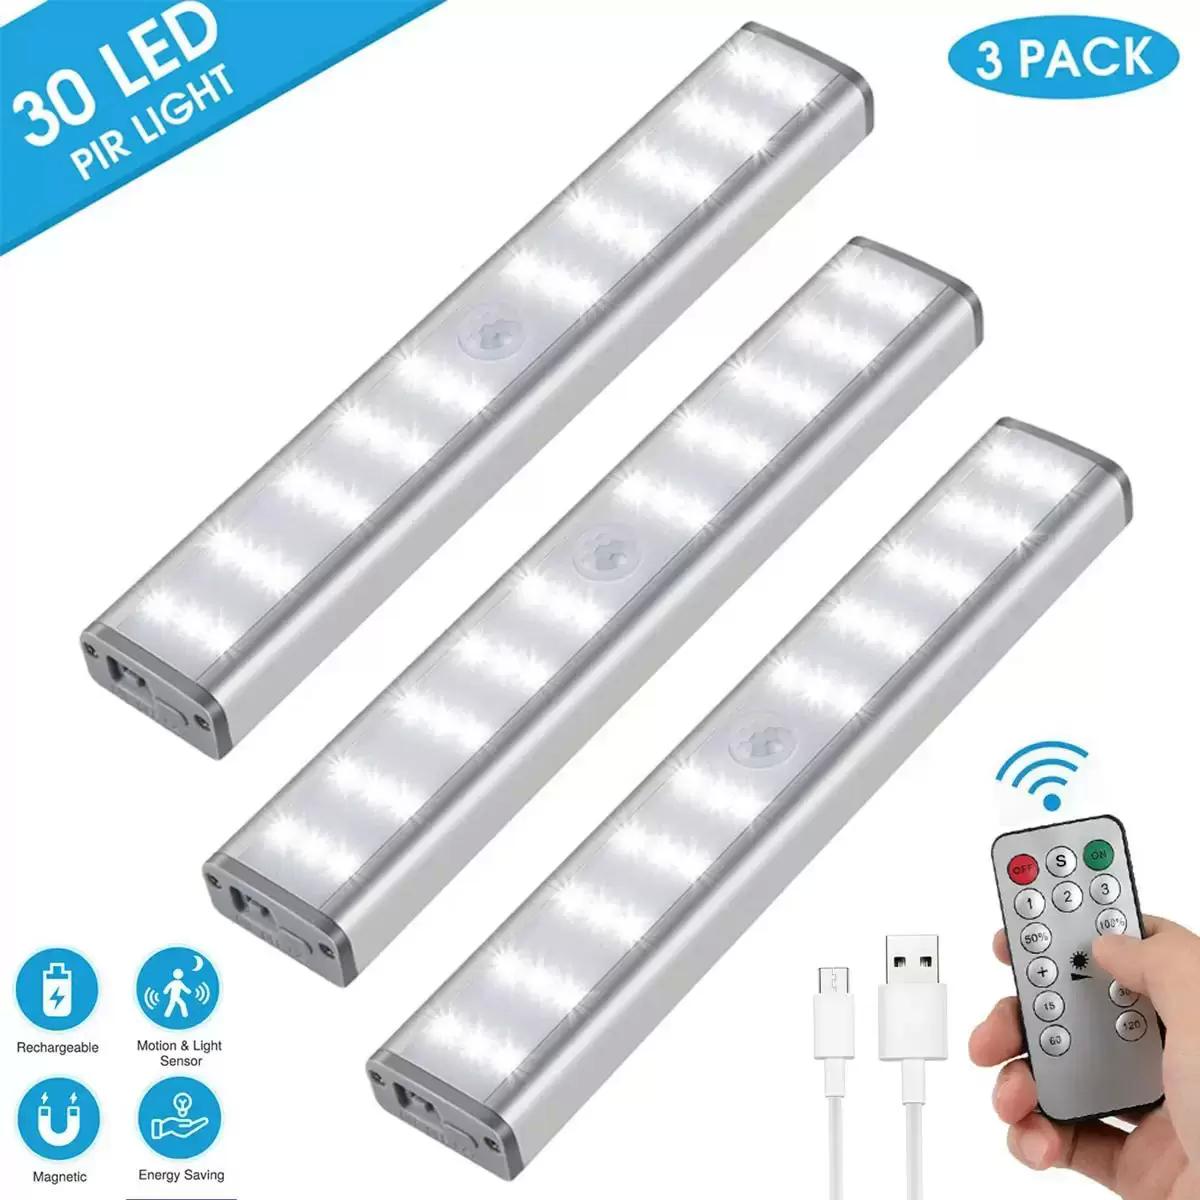 Closet or Under Cabinet 30 LED Lighting for $17.99 Shipped